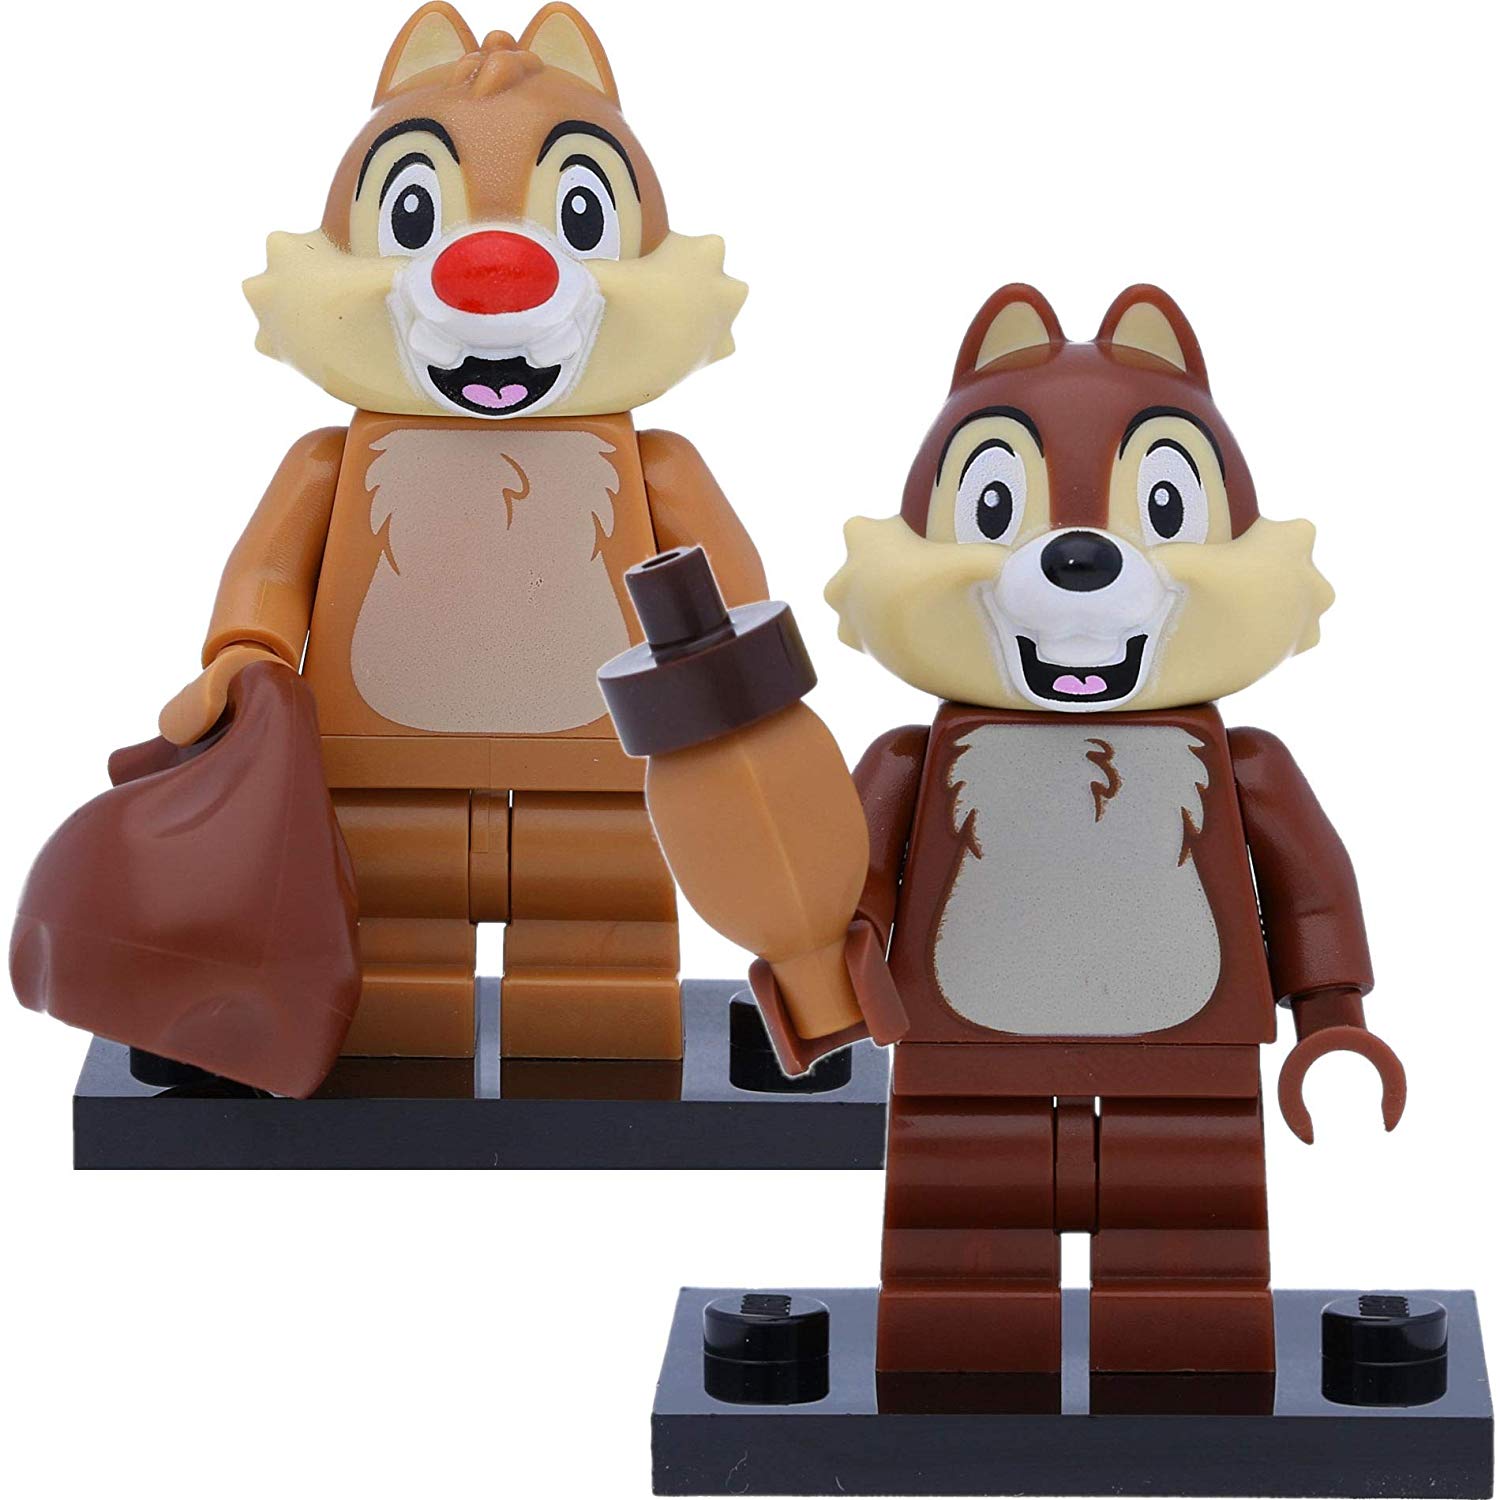 Lego 71024 Disney Series 2 Minifigures: Chip #7 And Chap (Dale) #8